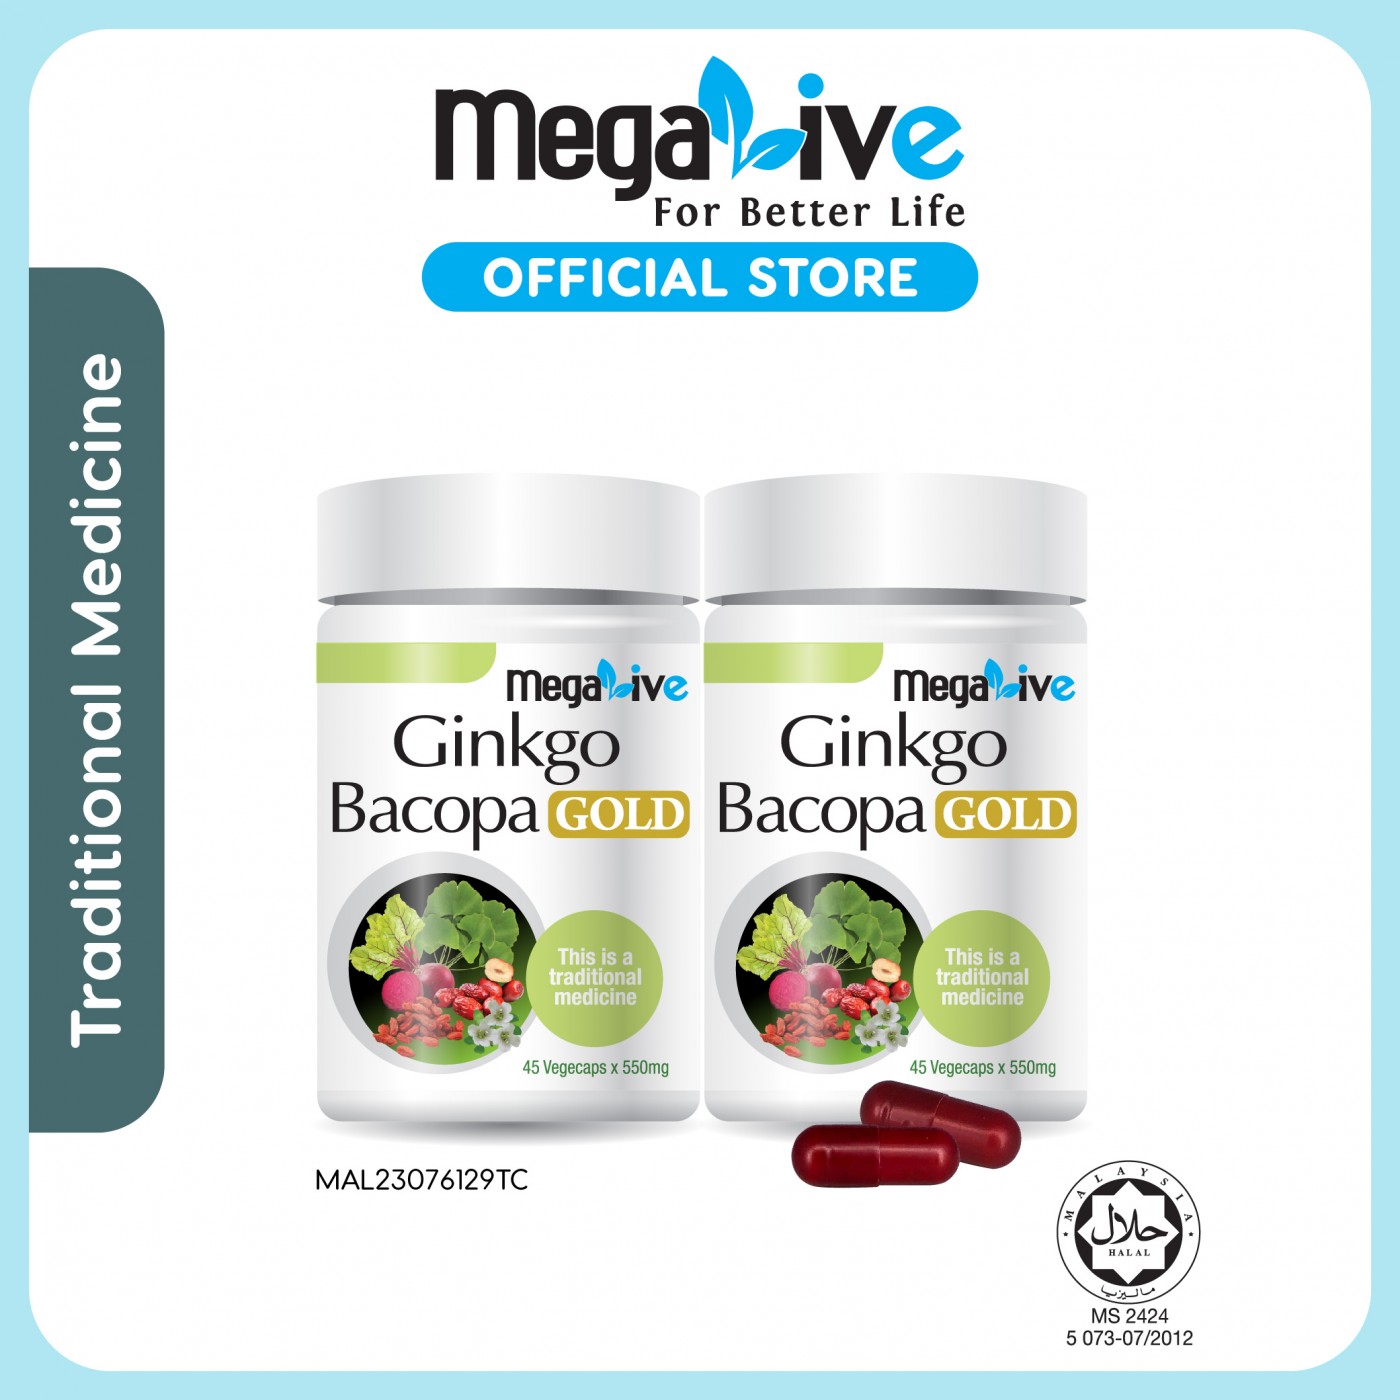 MegaLive Ginkgo Bacopa Plus Gold